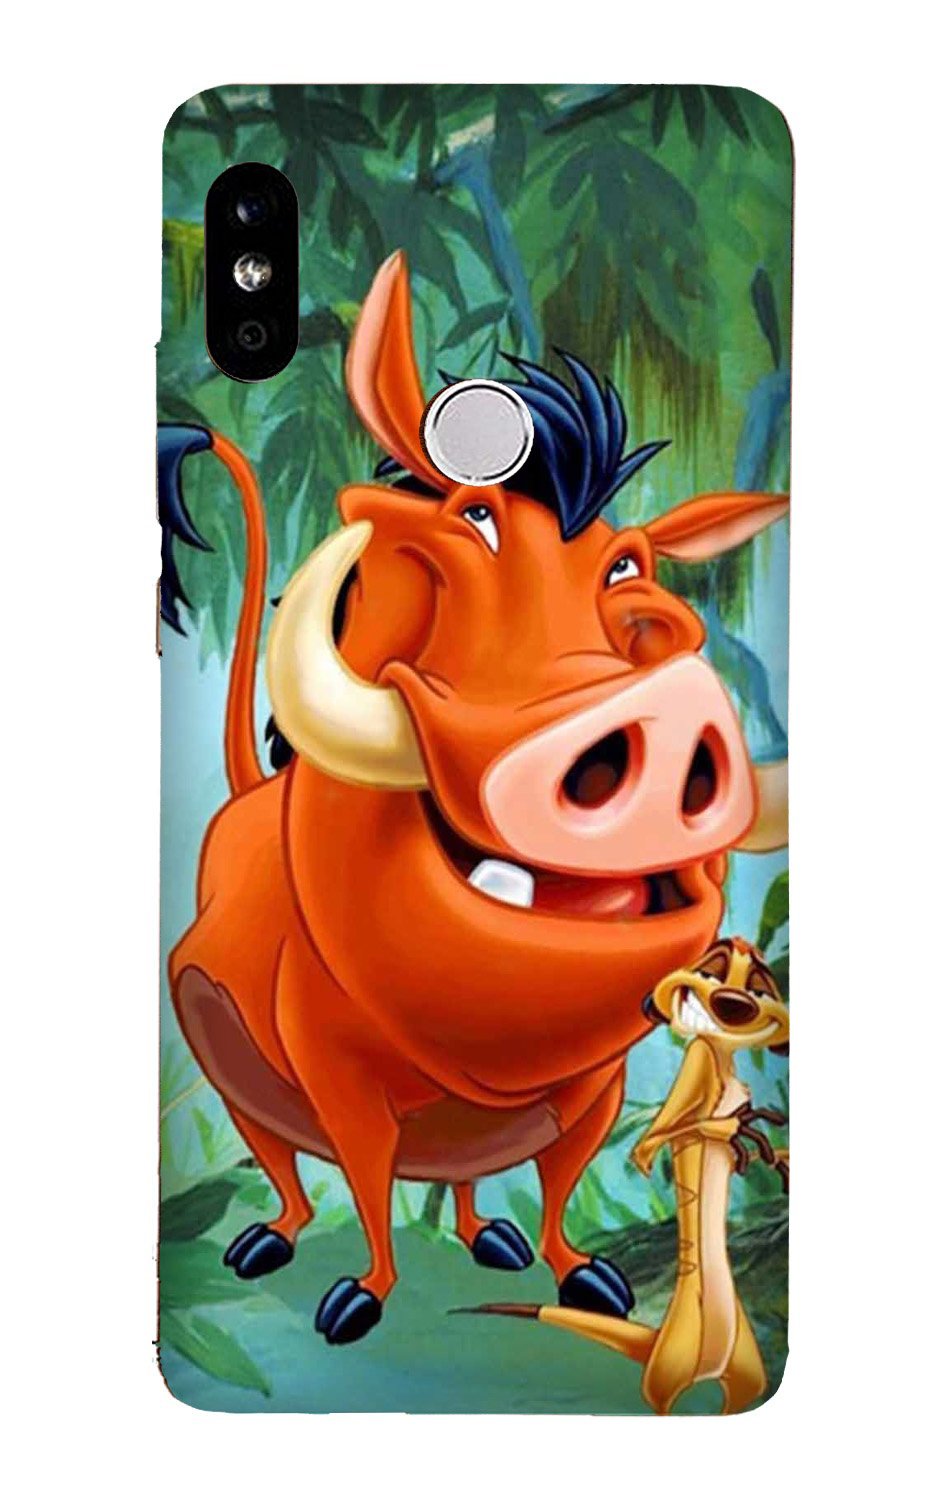 Timon and Pumbaa Mobile Back Case for Redmi Note 5 Pro  (Design - 305)